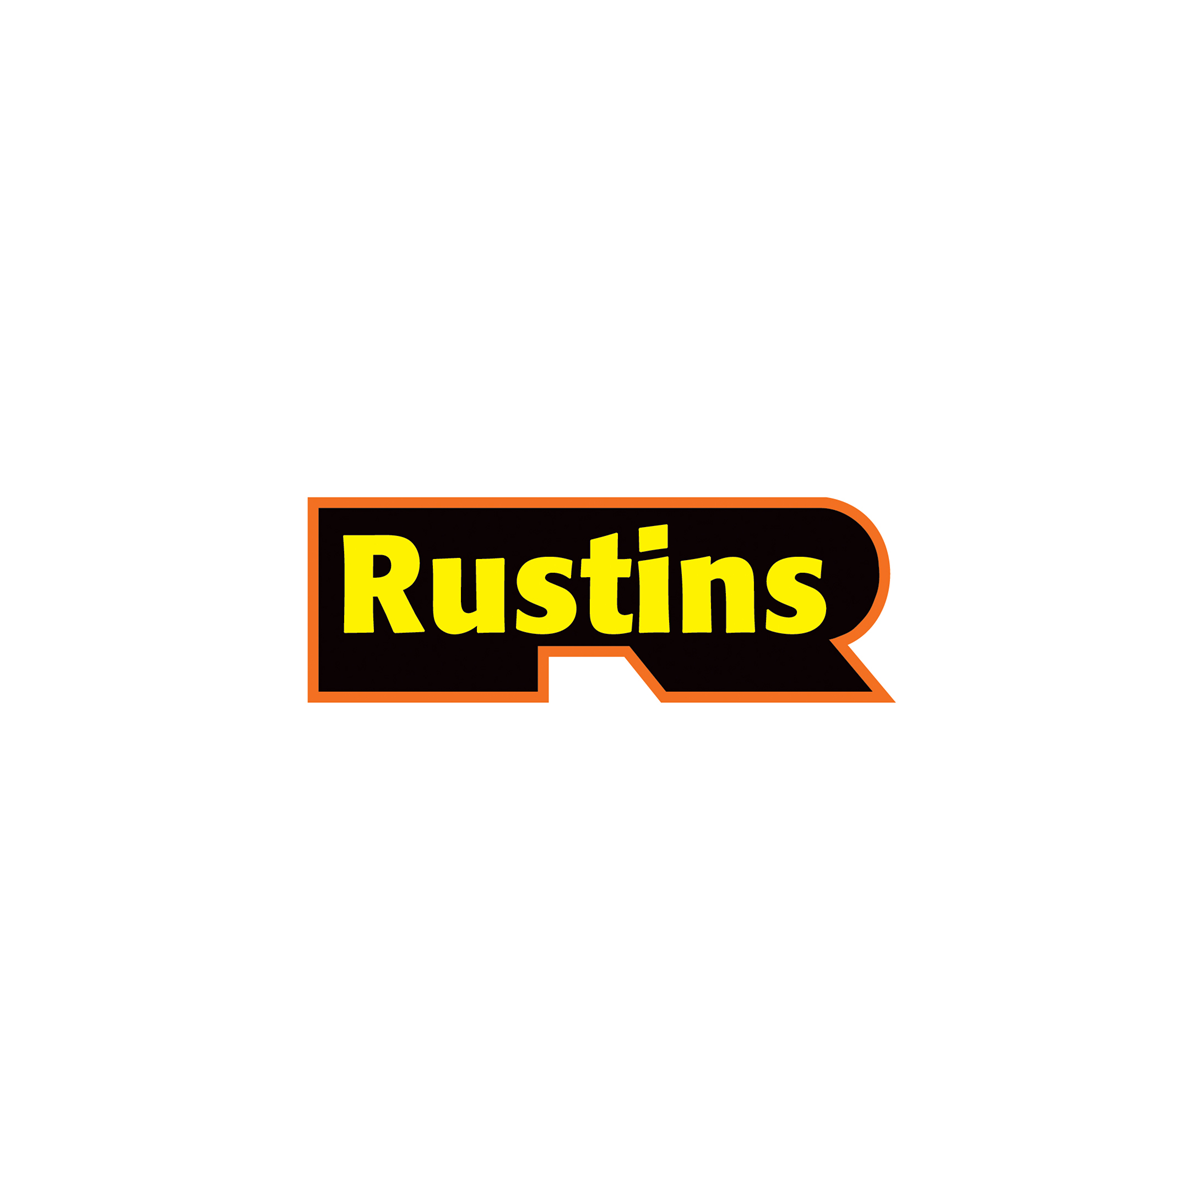 Where to Buy Rustins Paint